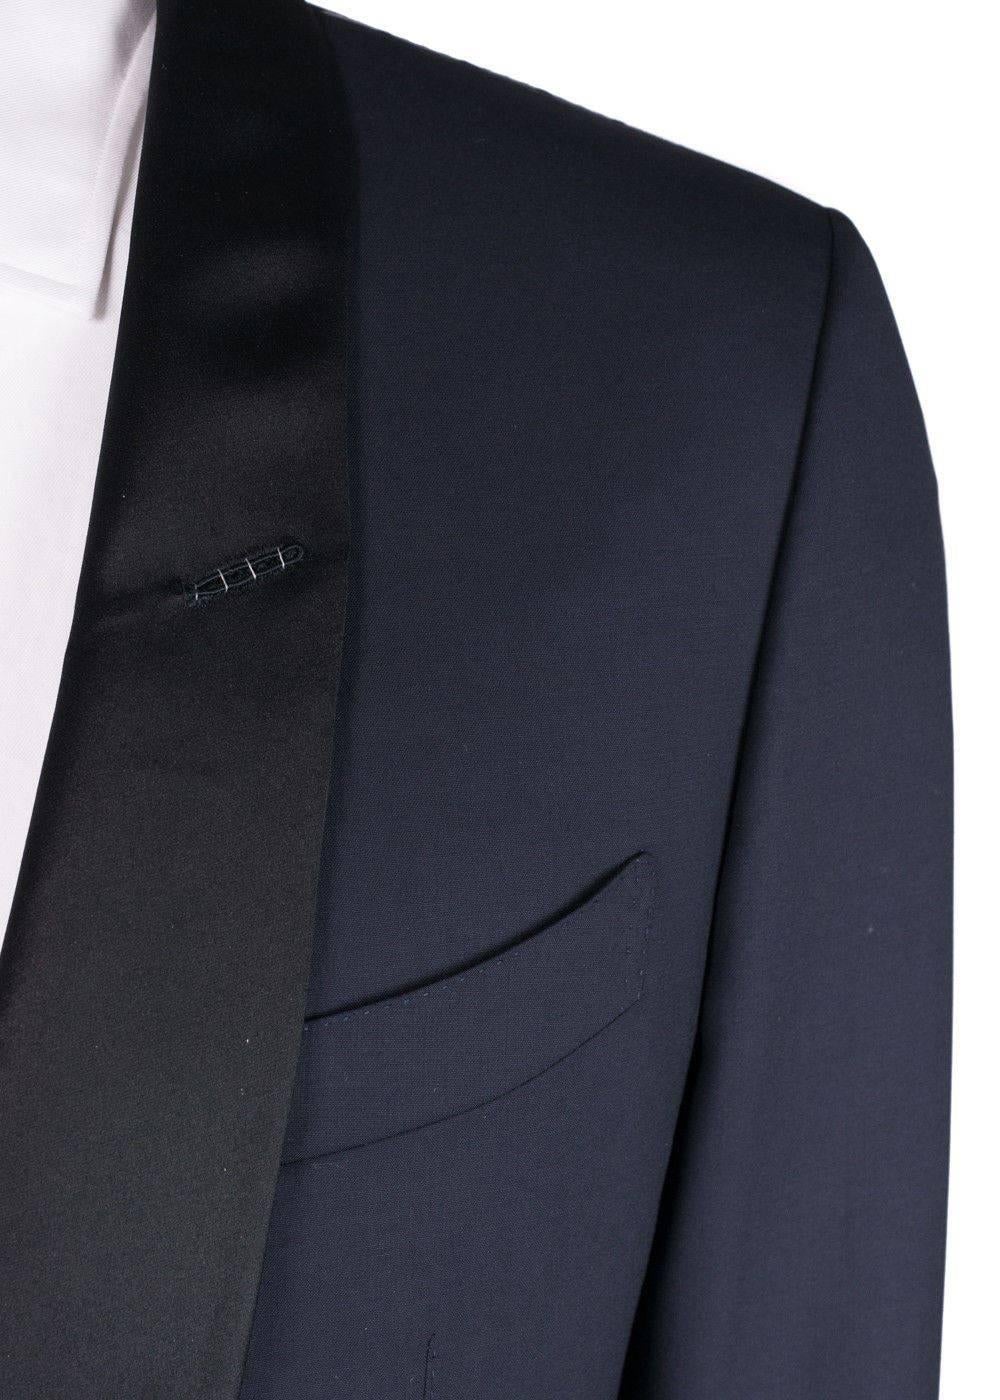 Brand New Tom Ford O'Connor Tuxedo
Original Tags & Hanger Included
Retails In-Stores & Online for $5470
IT 56R / US 46 

A signature tuxedo, Tom Ford's Satin Shawl Lapel 'O'Connor' Base Tuxedo is crafted from a luxury twill fabric in rich Navy. This